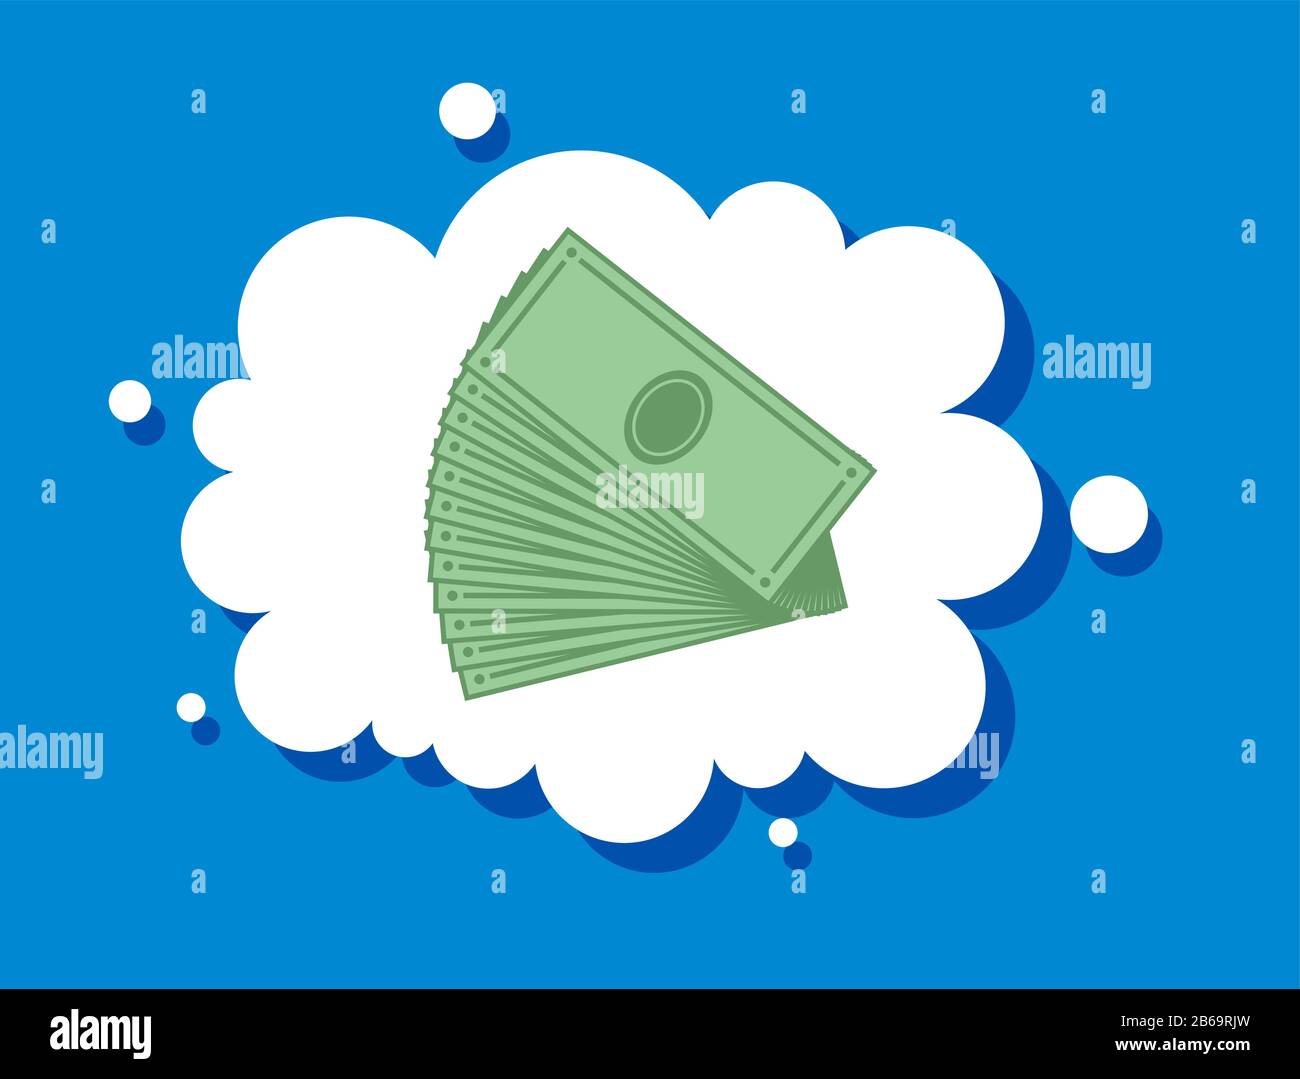 desire to have a lot of money. Dream of wealth. I want to be rich. Banknotes are fan-shaped. Cloud speech. Stock Vector